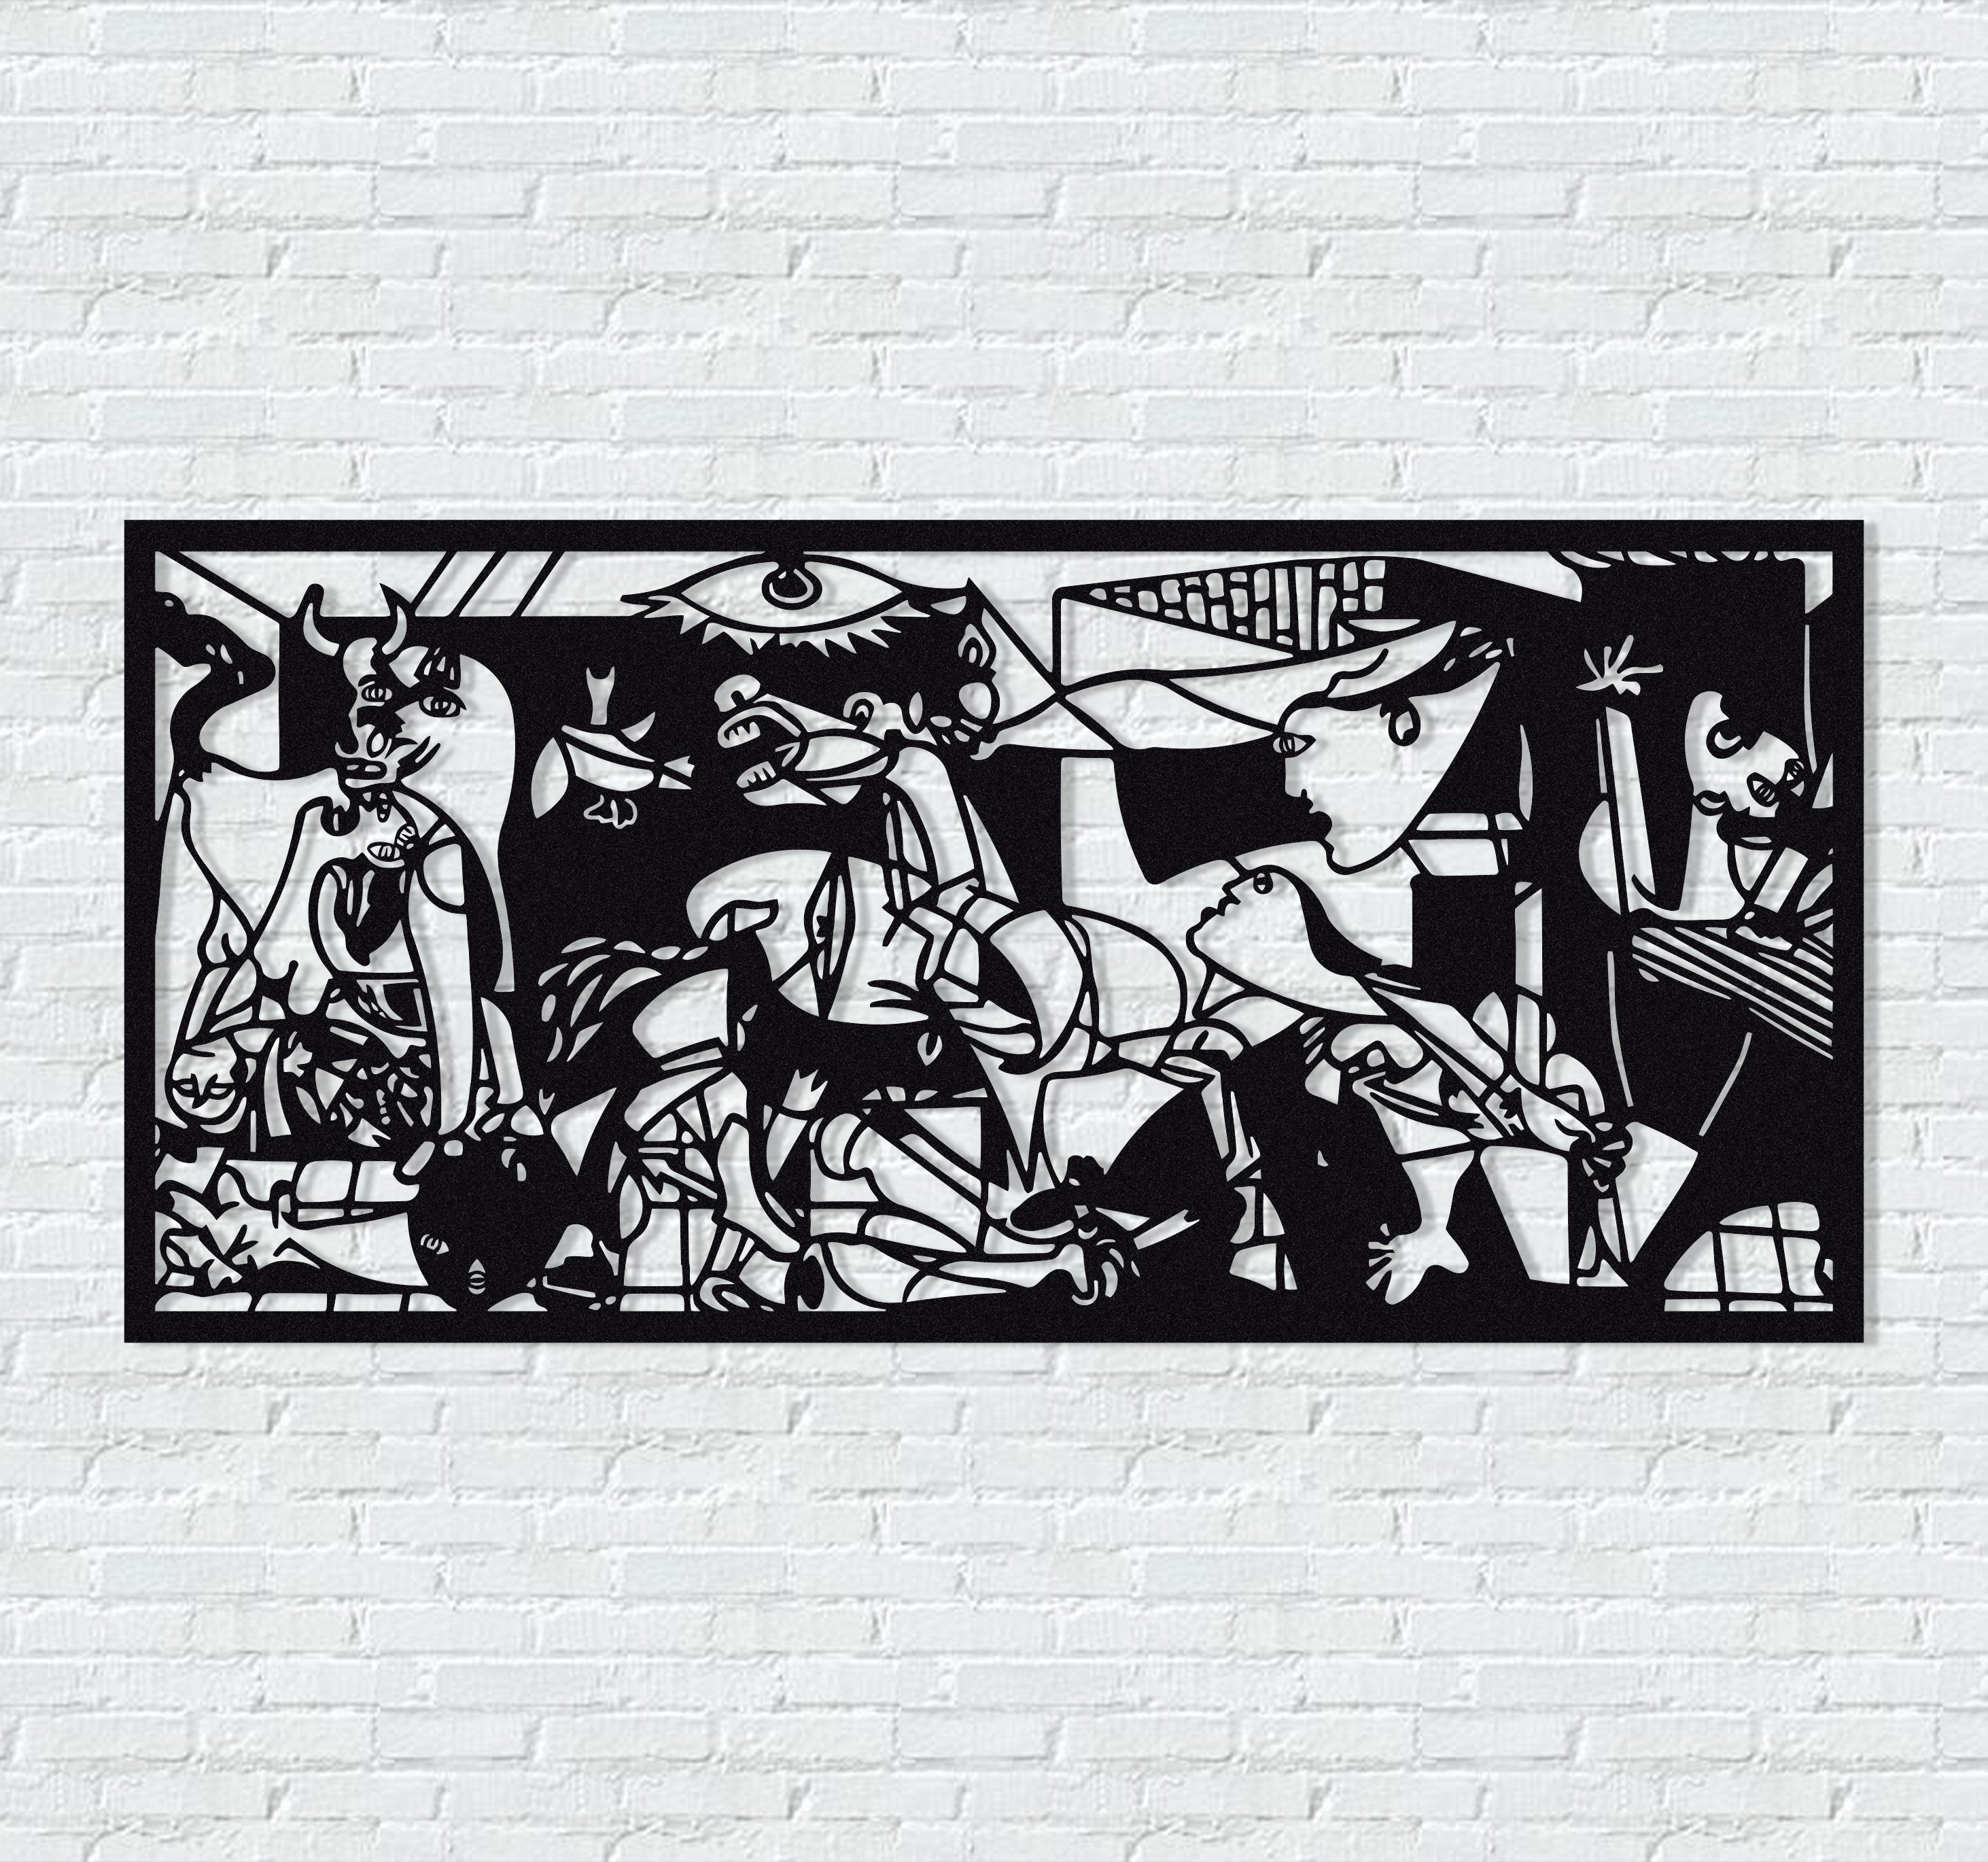 ・"Guernica Pablo Picasso"・Premium Metal Wall Art - Limited Edition